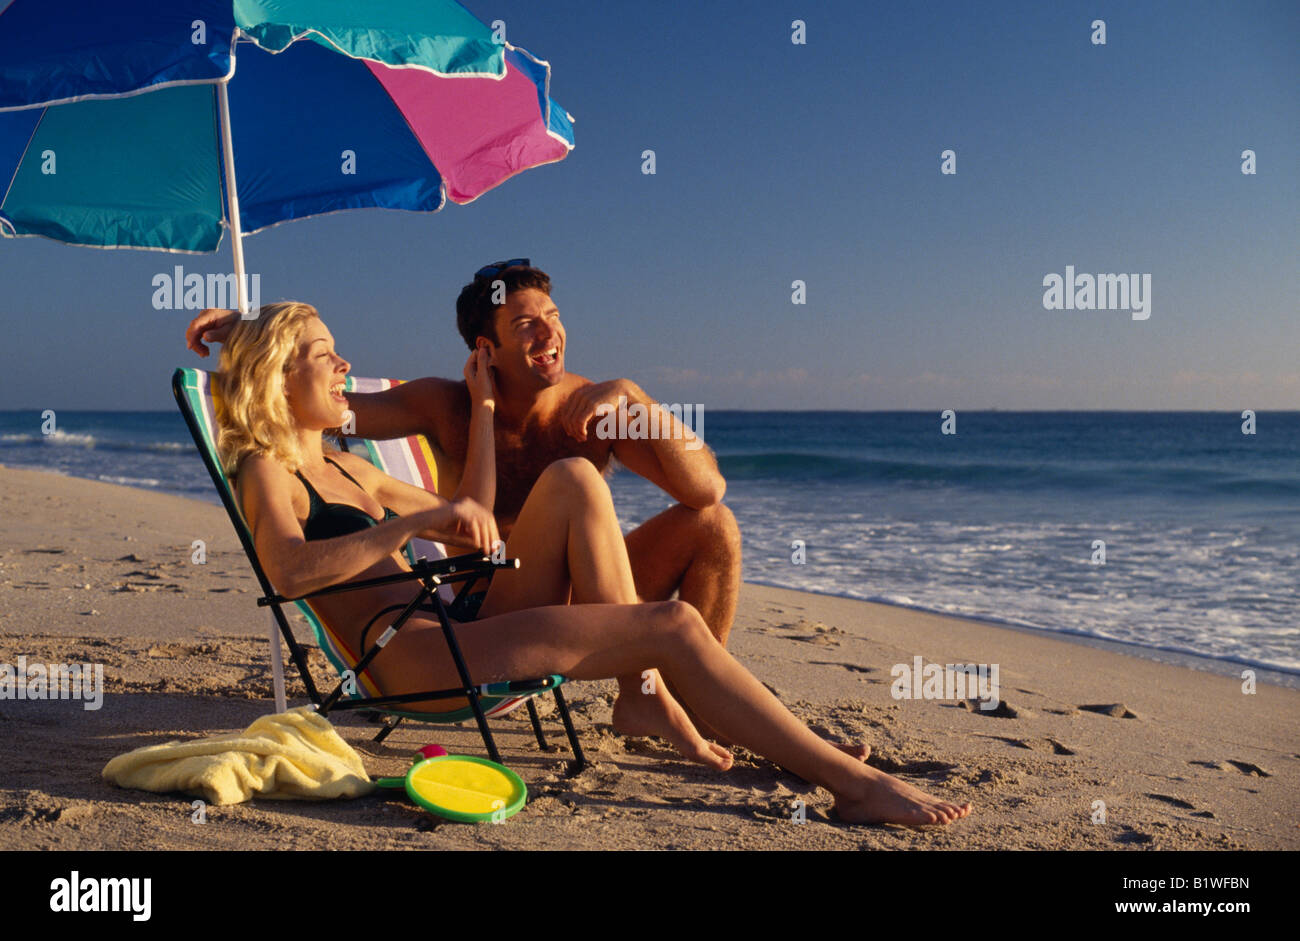 USA North America Florida Fort Lauderdale Young couple on sandy beach sitting under a parasol umbrella Stock Photo